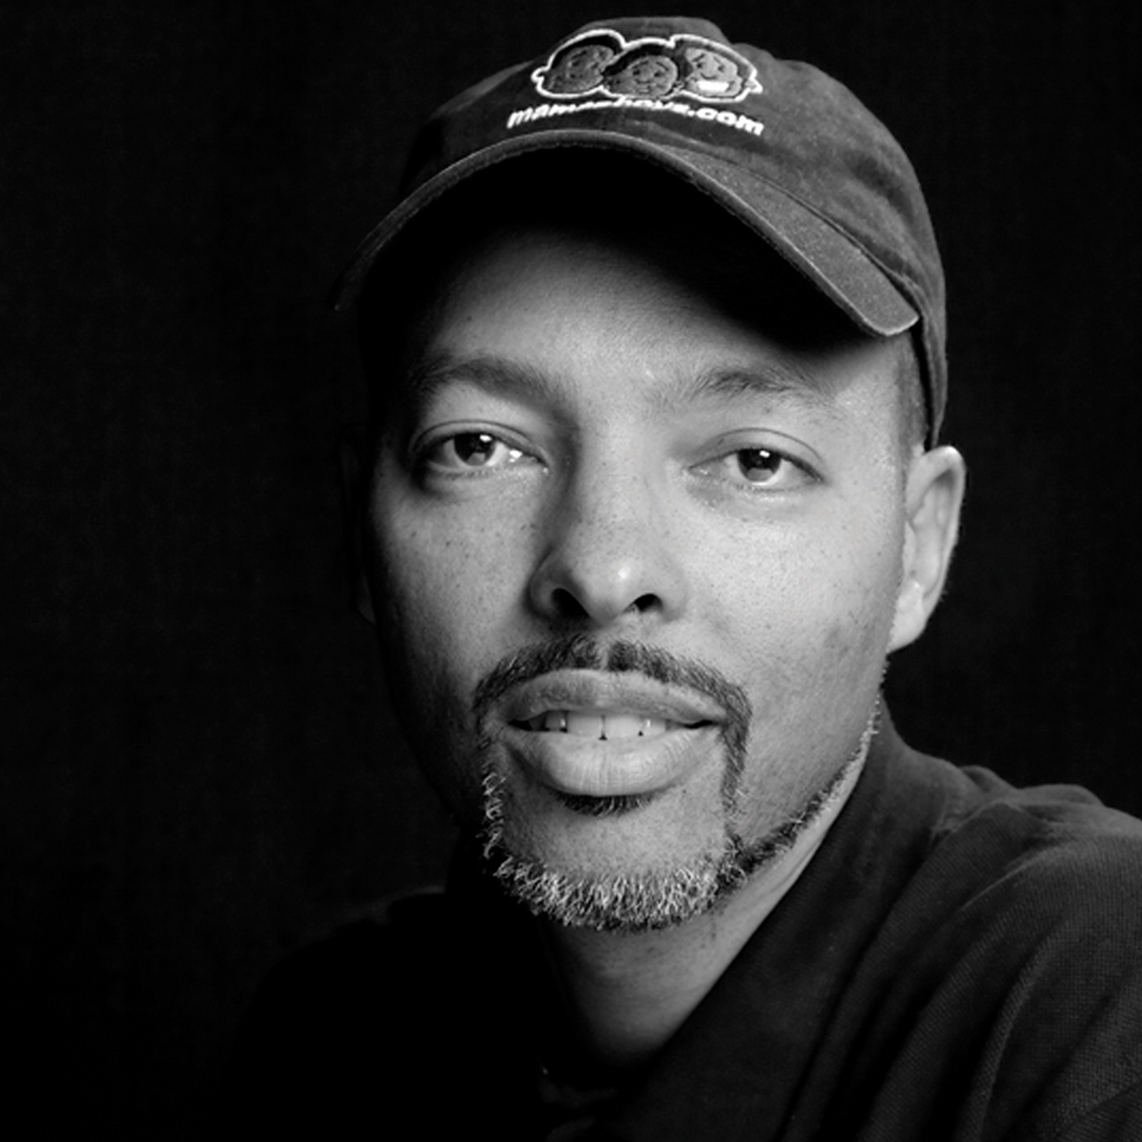 Headshot of author Jerry Craft, wearing a baseball cap featuring characters from his graphic novels.